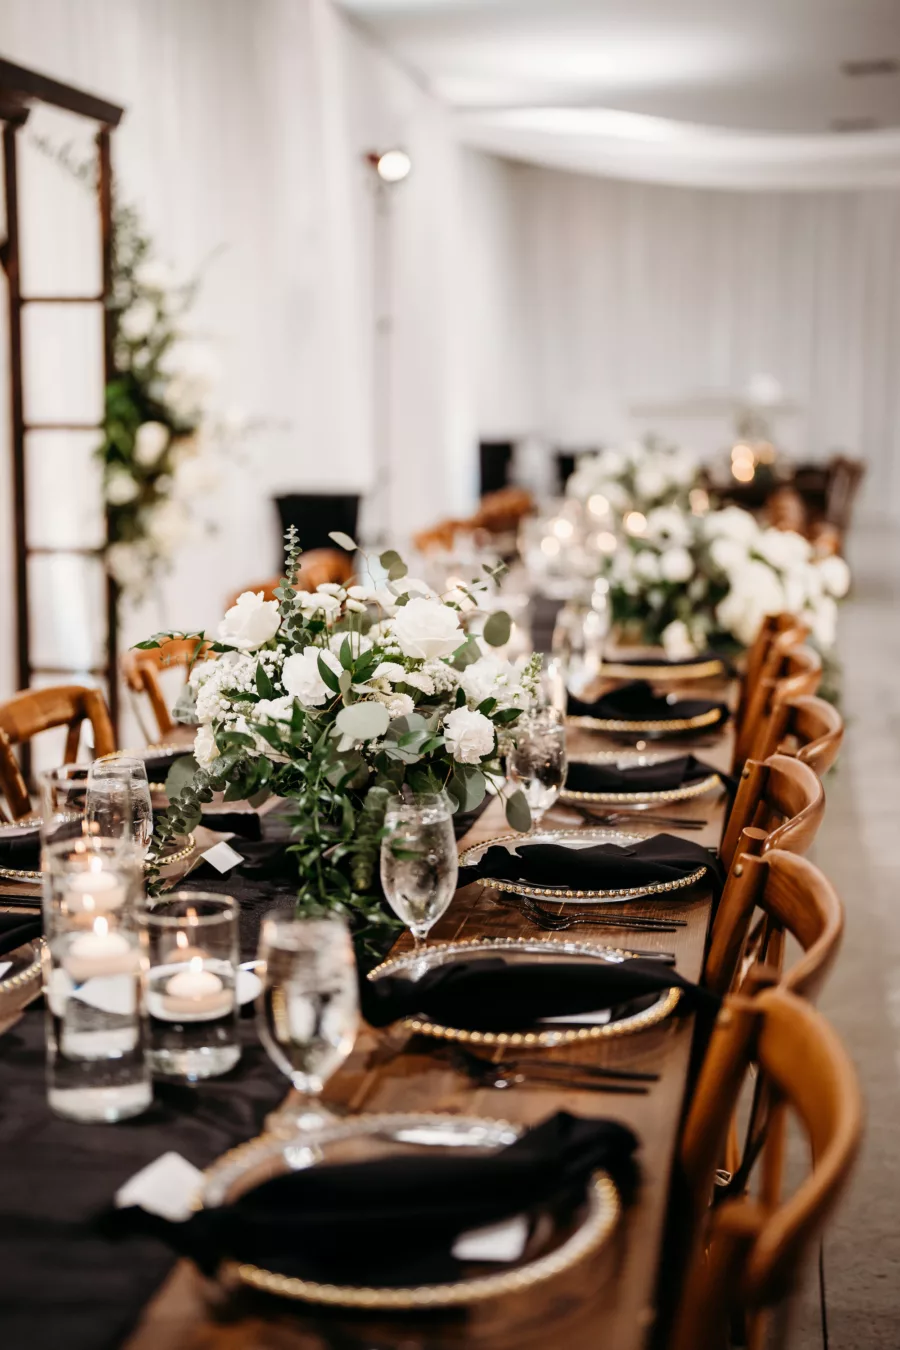 Elegant Rustic Black and White Wedding Reception Tablescape Ideas | Wooden Feasting Tables, Crossback Chairs | White Rose and Greenery Centerpiece Decor Inspiration